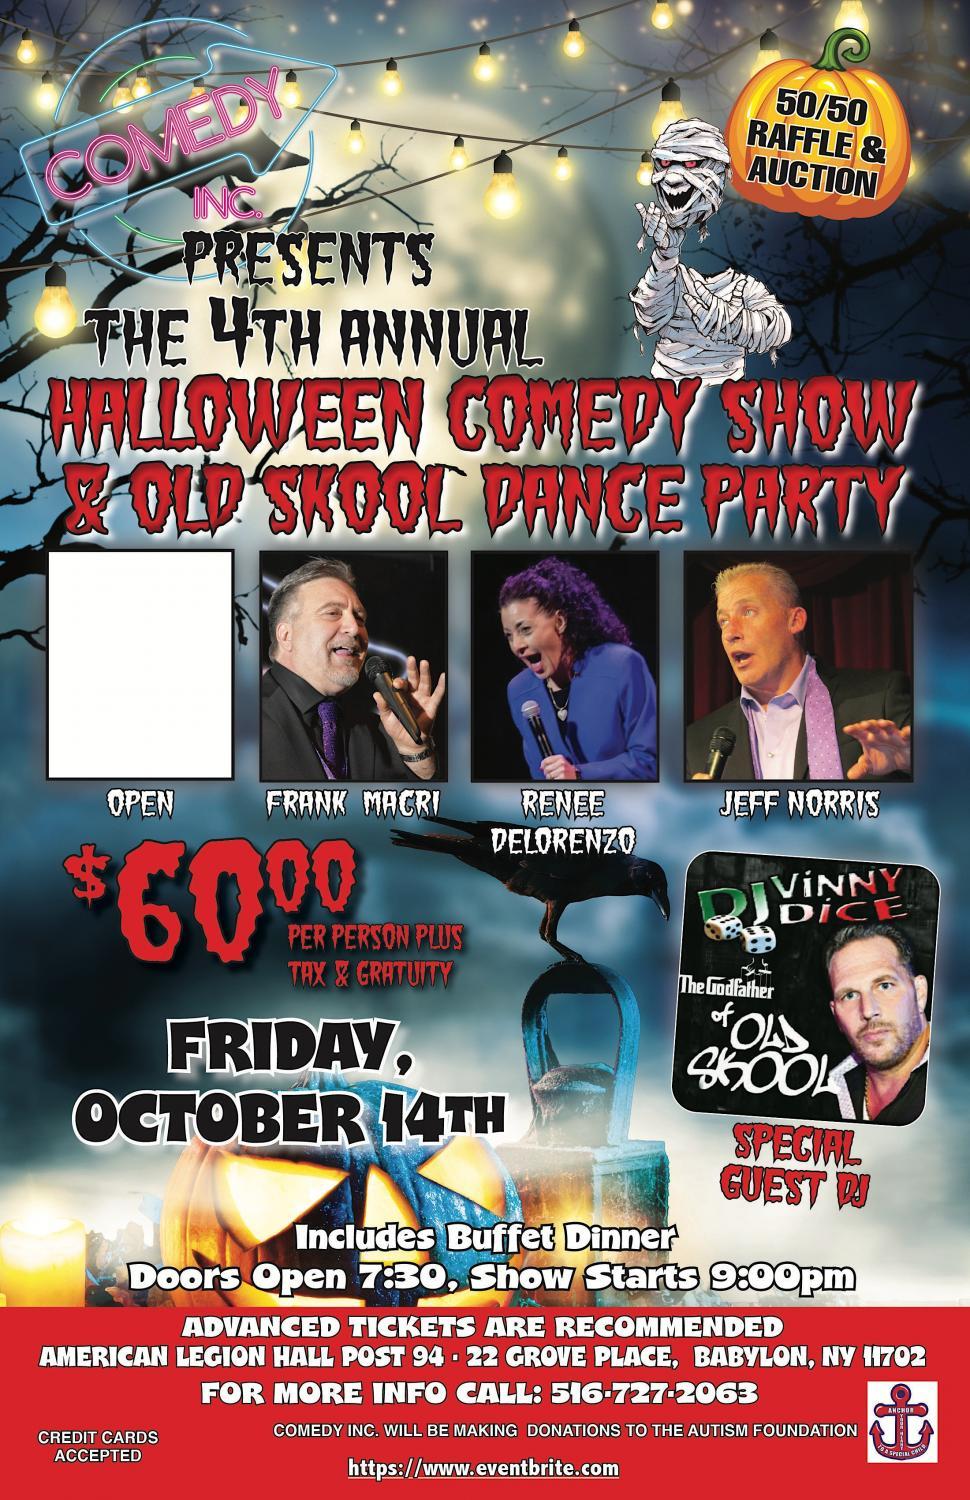 Comedy's Inc. 4th Annual Halloween Comedy Show & Old Skool Dance Party
Fri Oct 14, 7:30 PM - Fri Oct 14, 11:30 PM